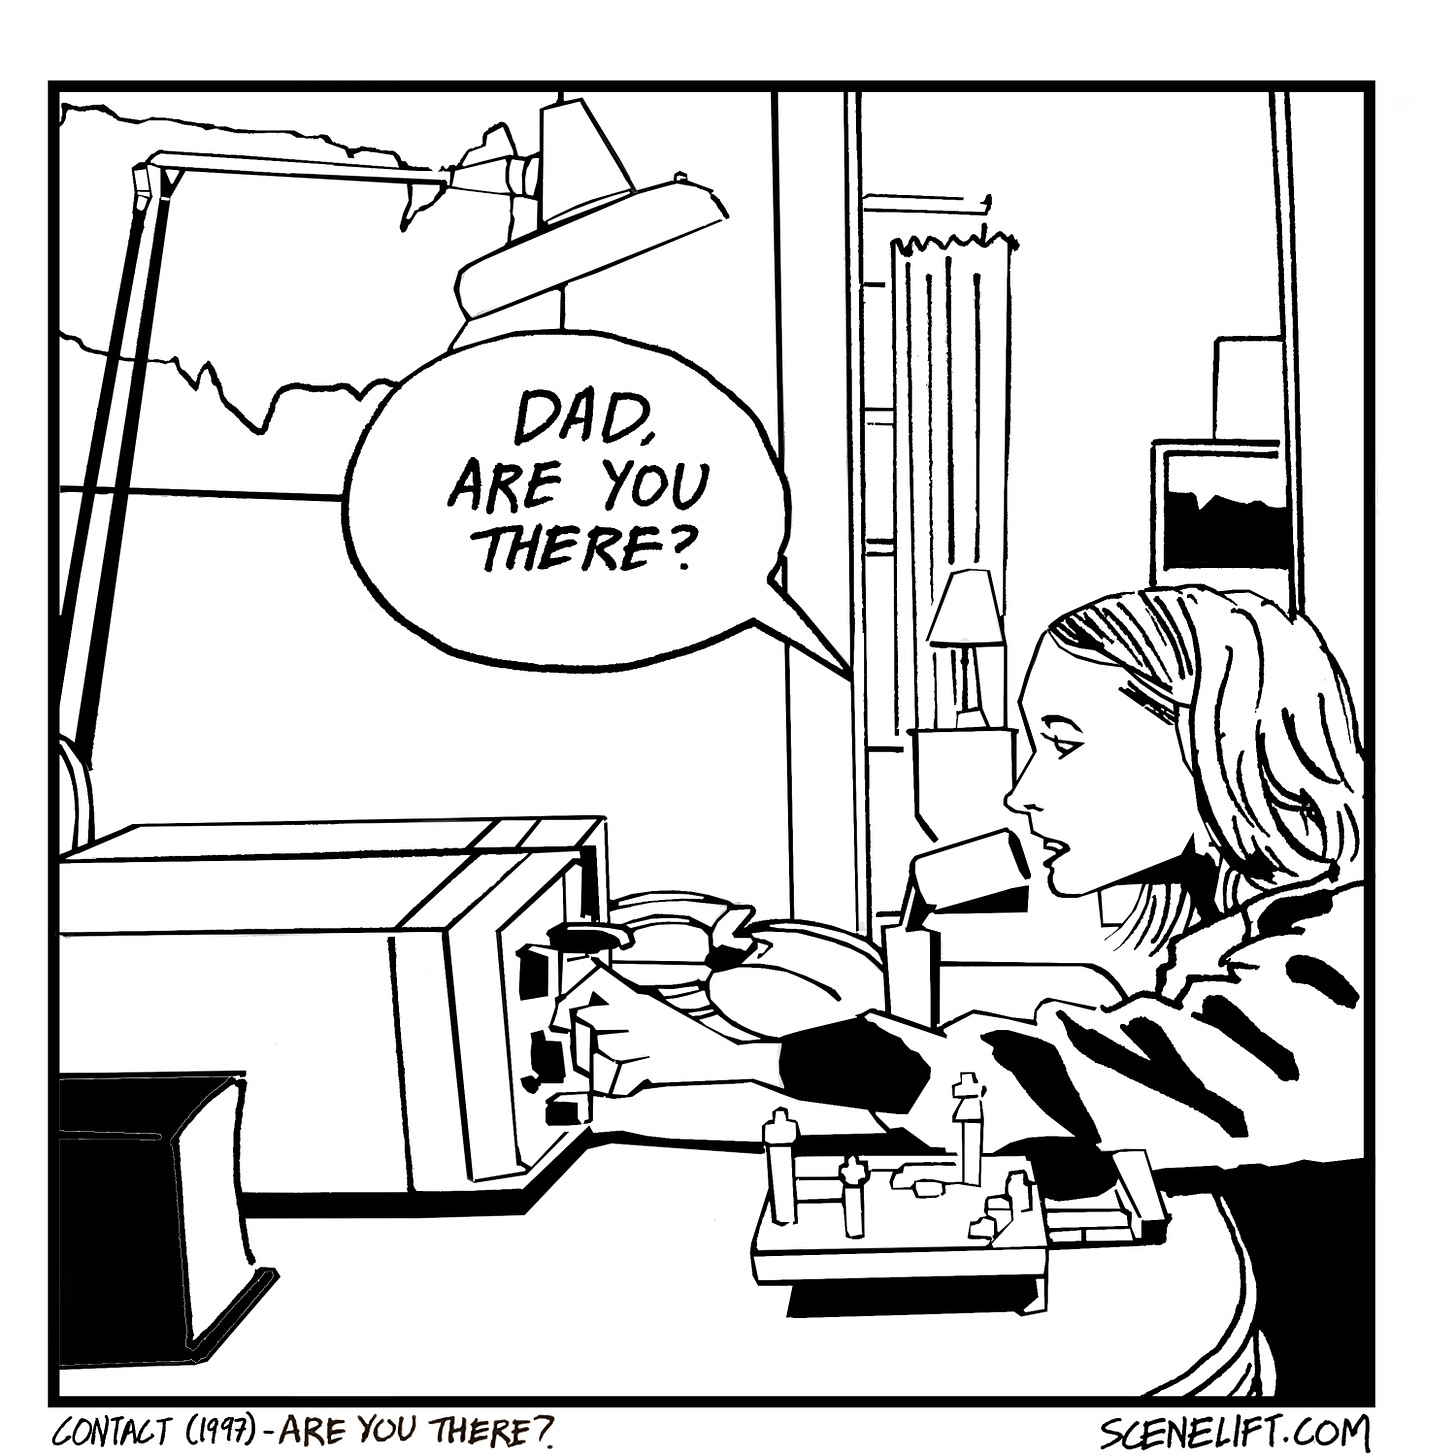 Fan art comic of Ellie as a child in the movie Contact, trying to contact her dad using the radio transmitter after he dies